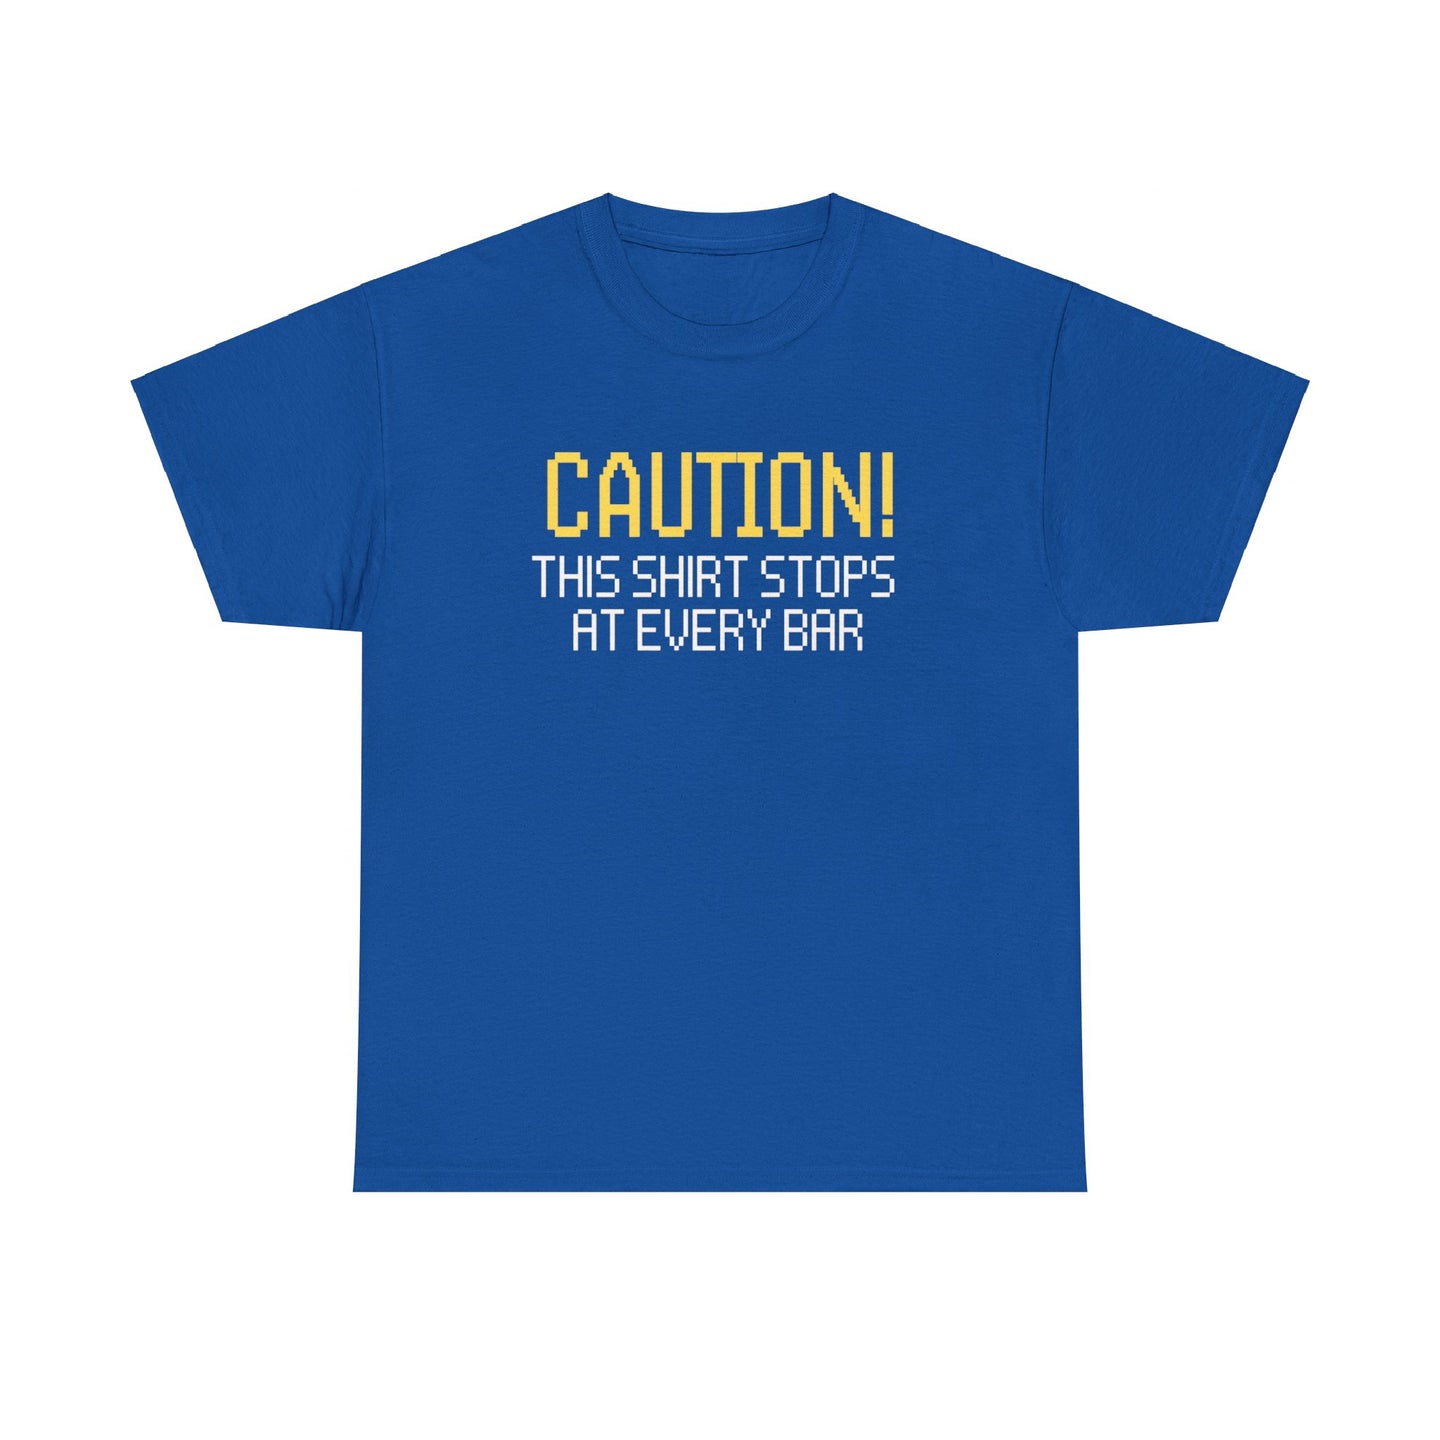 CAUTION! THIS SHIRT STOPS AT EVERY BAR